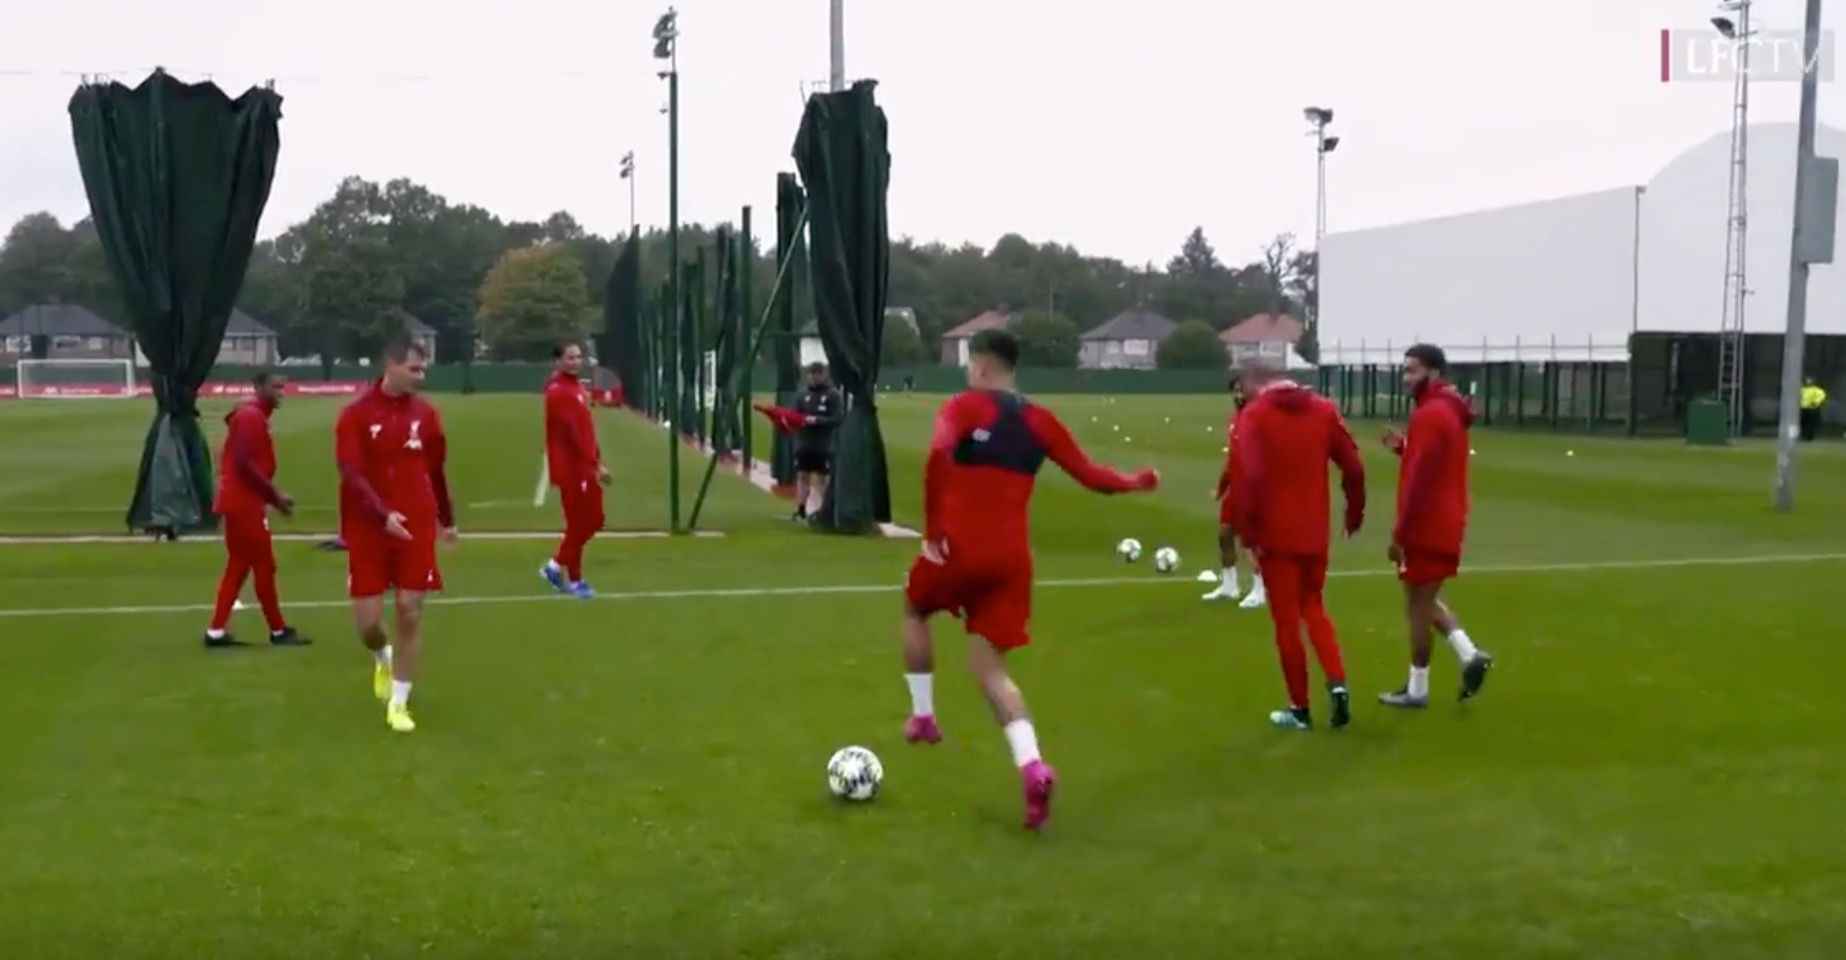 (Video) Van Dijk left screaming as Liverpool put on a show with slick rondo in training